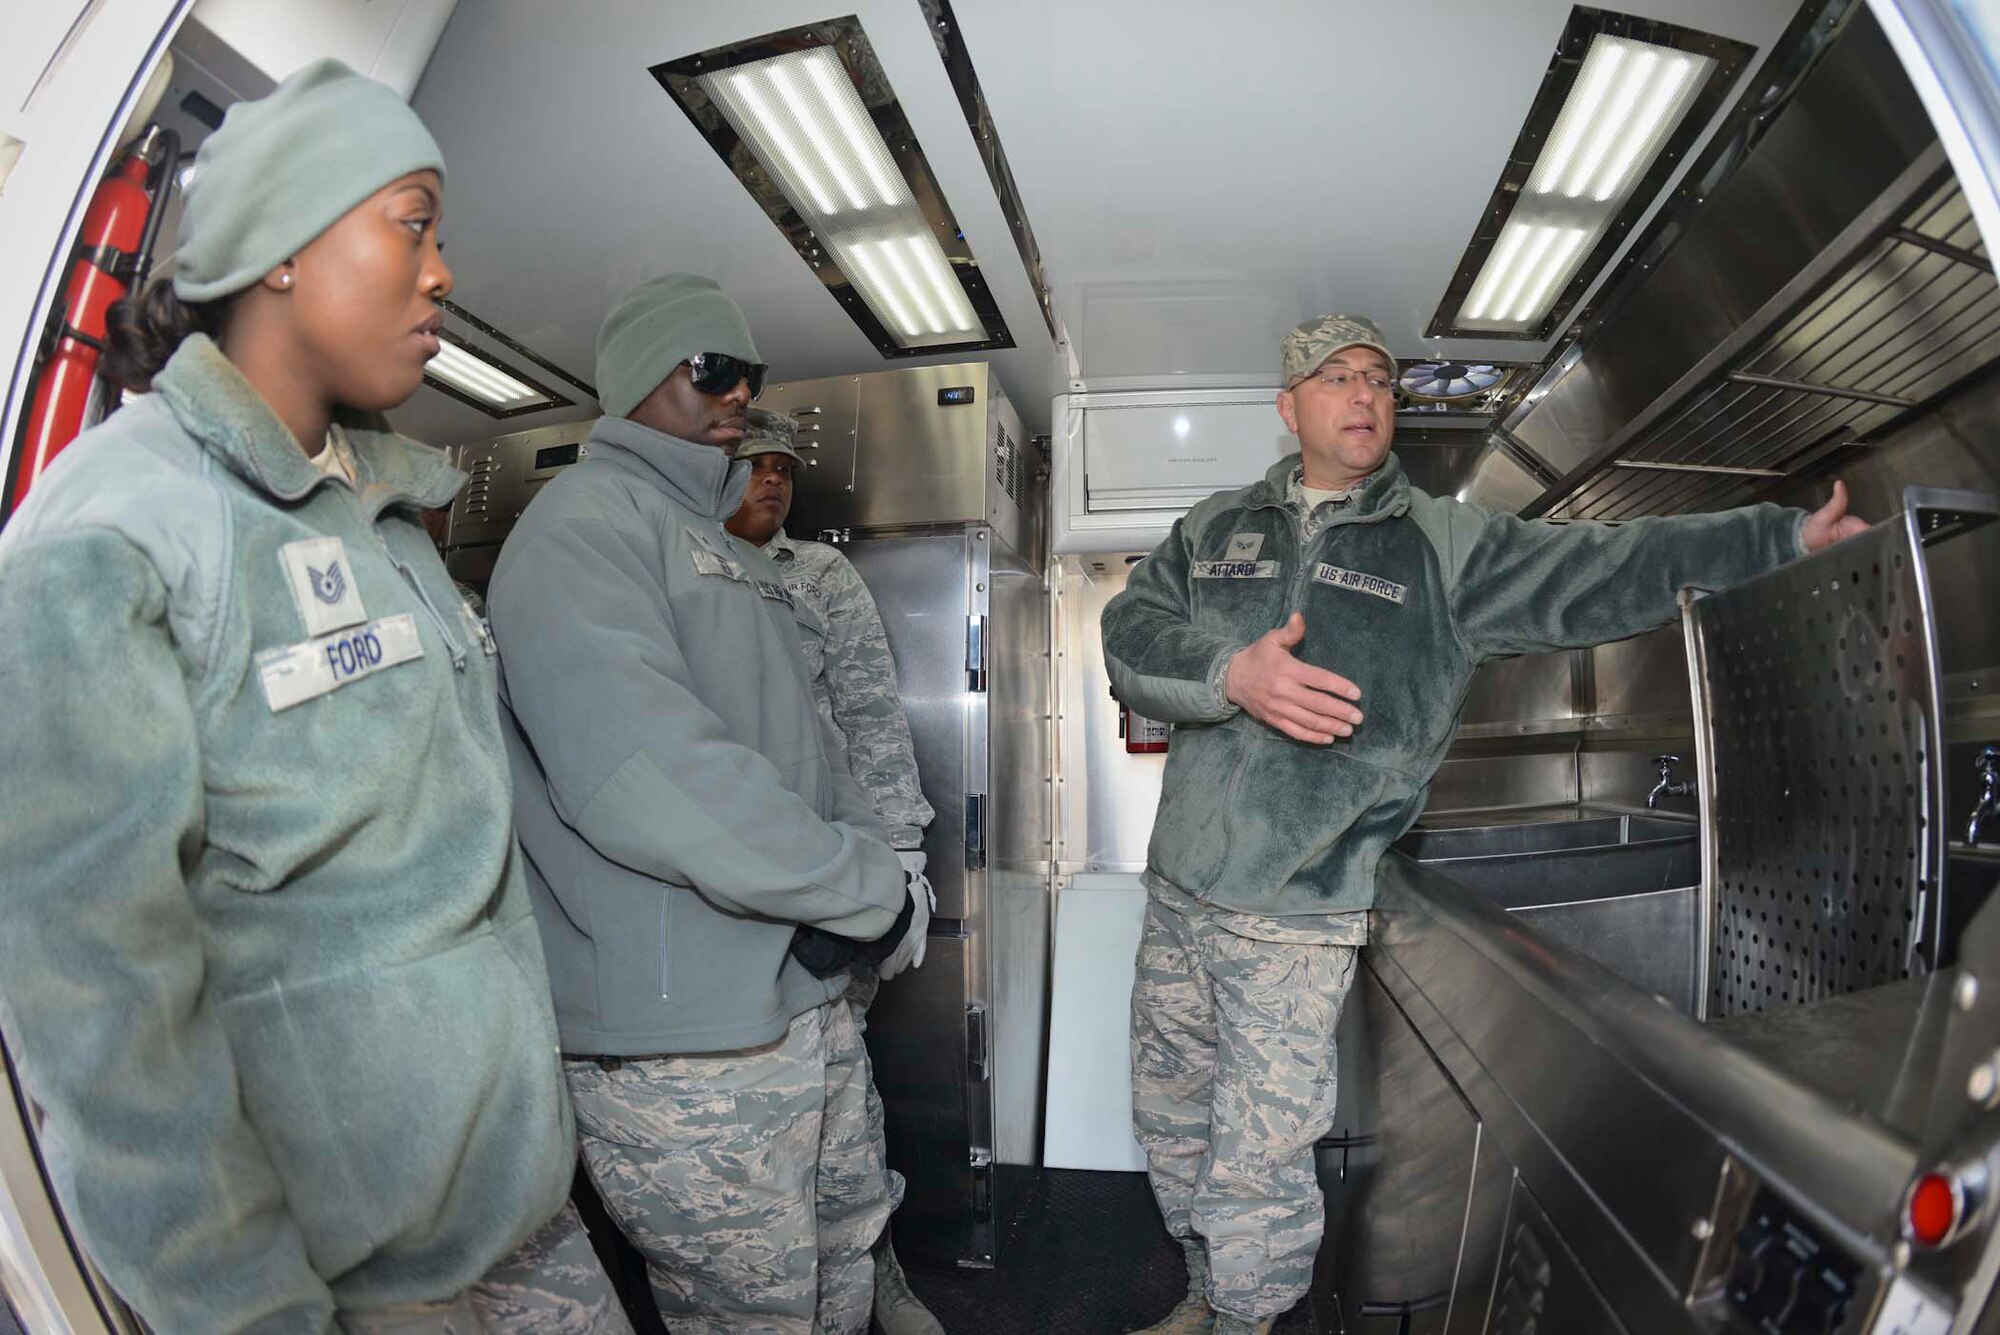 U.S. Air Force Senior Airmen Gino Attardi, 136th Force Support Squadron, Services Flight, Texas Air National Guard, demonstrates the functionality of a newly assigned Disaster Relief Mobile Kitchen Trailer (DRMKT) to members of the 116th Force Support Squadron, Services Flight, Georgia Air National Guard, Robbins AFB, at Naval Air Station Fort Worth Joint Reserve Base, Texas, Feb. 22, 2014. Members of the 116th FSS/FSV participated in the two-day training event in anticipation of receiving their own DRMKT in July 2014. (Air National Guard photos by Master Sgt. Charles Hatton/Released)